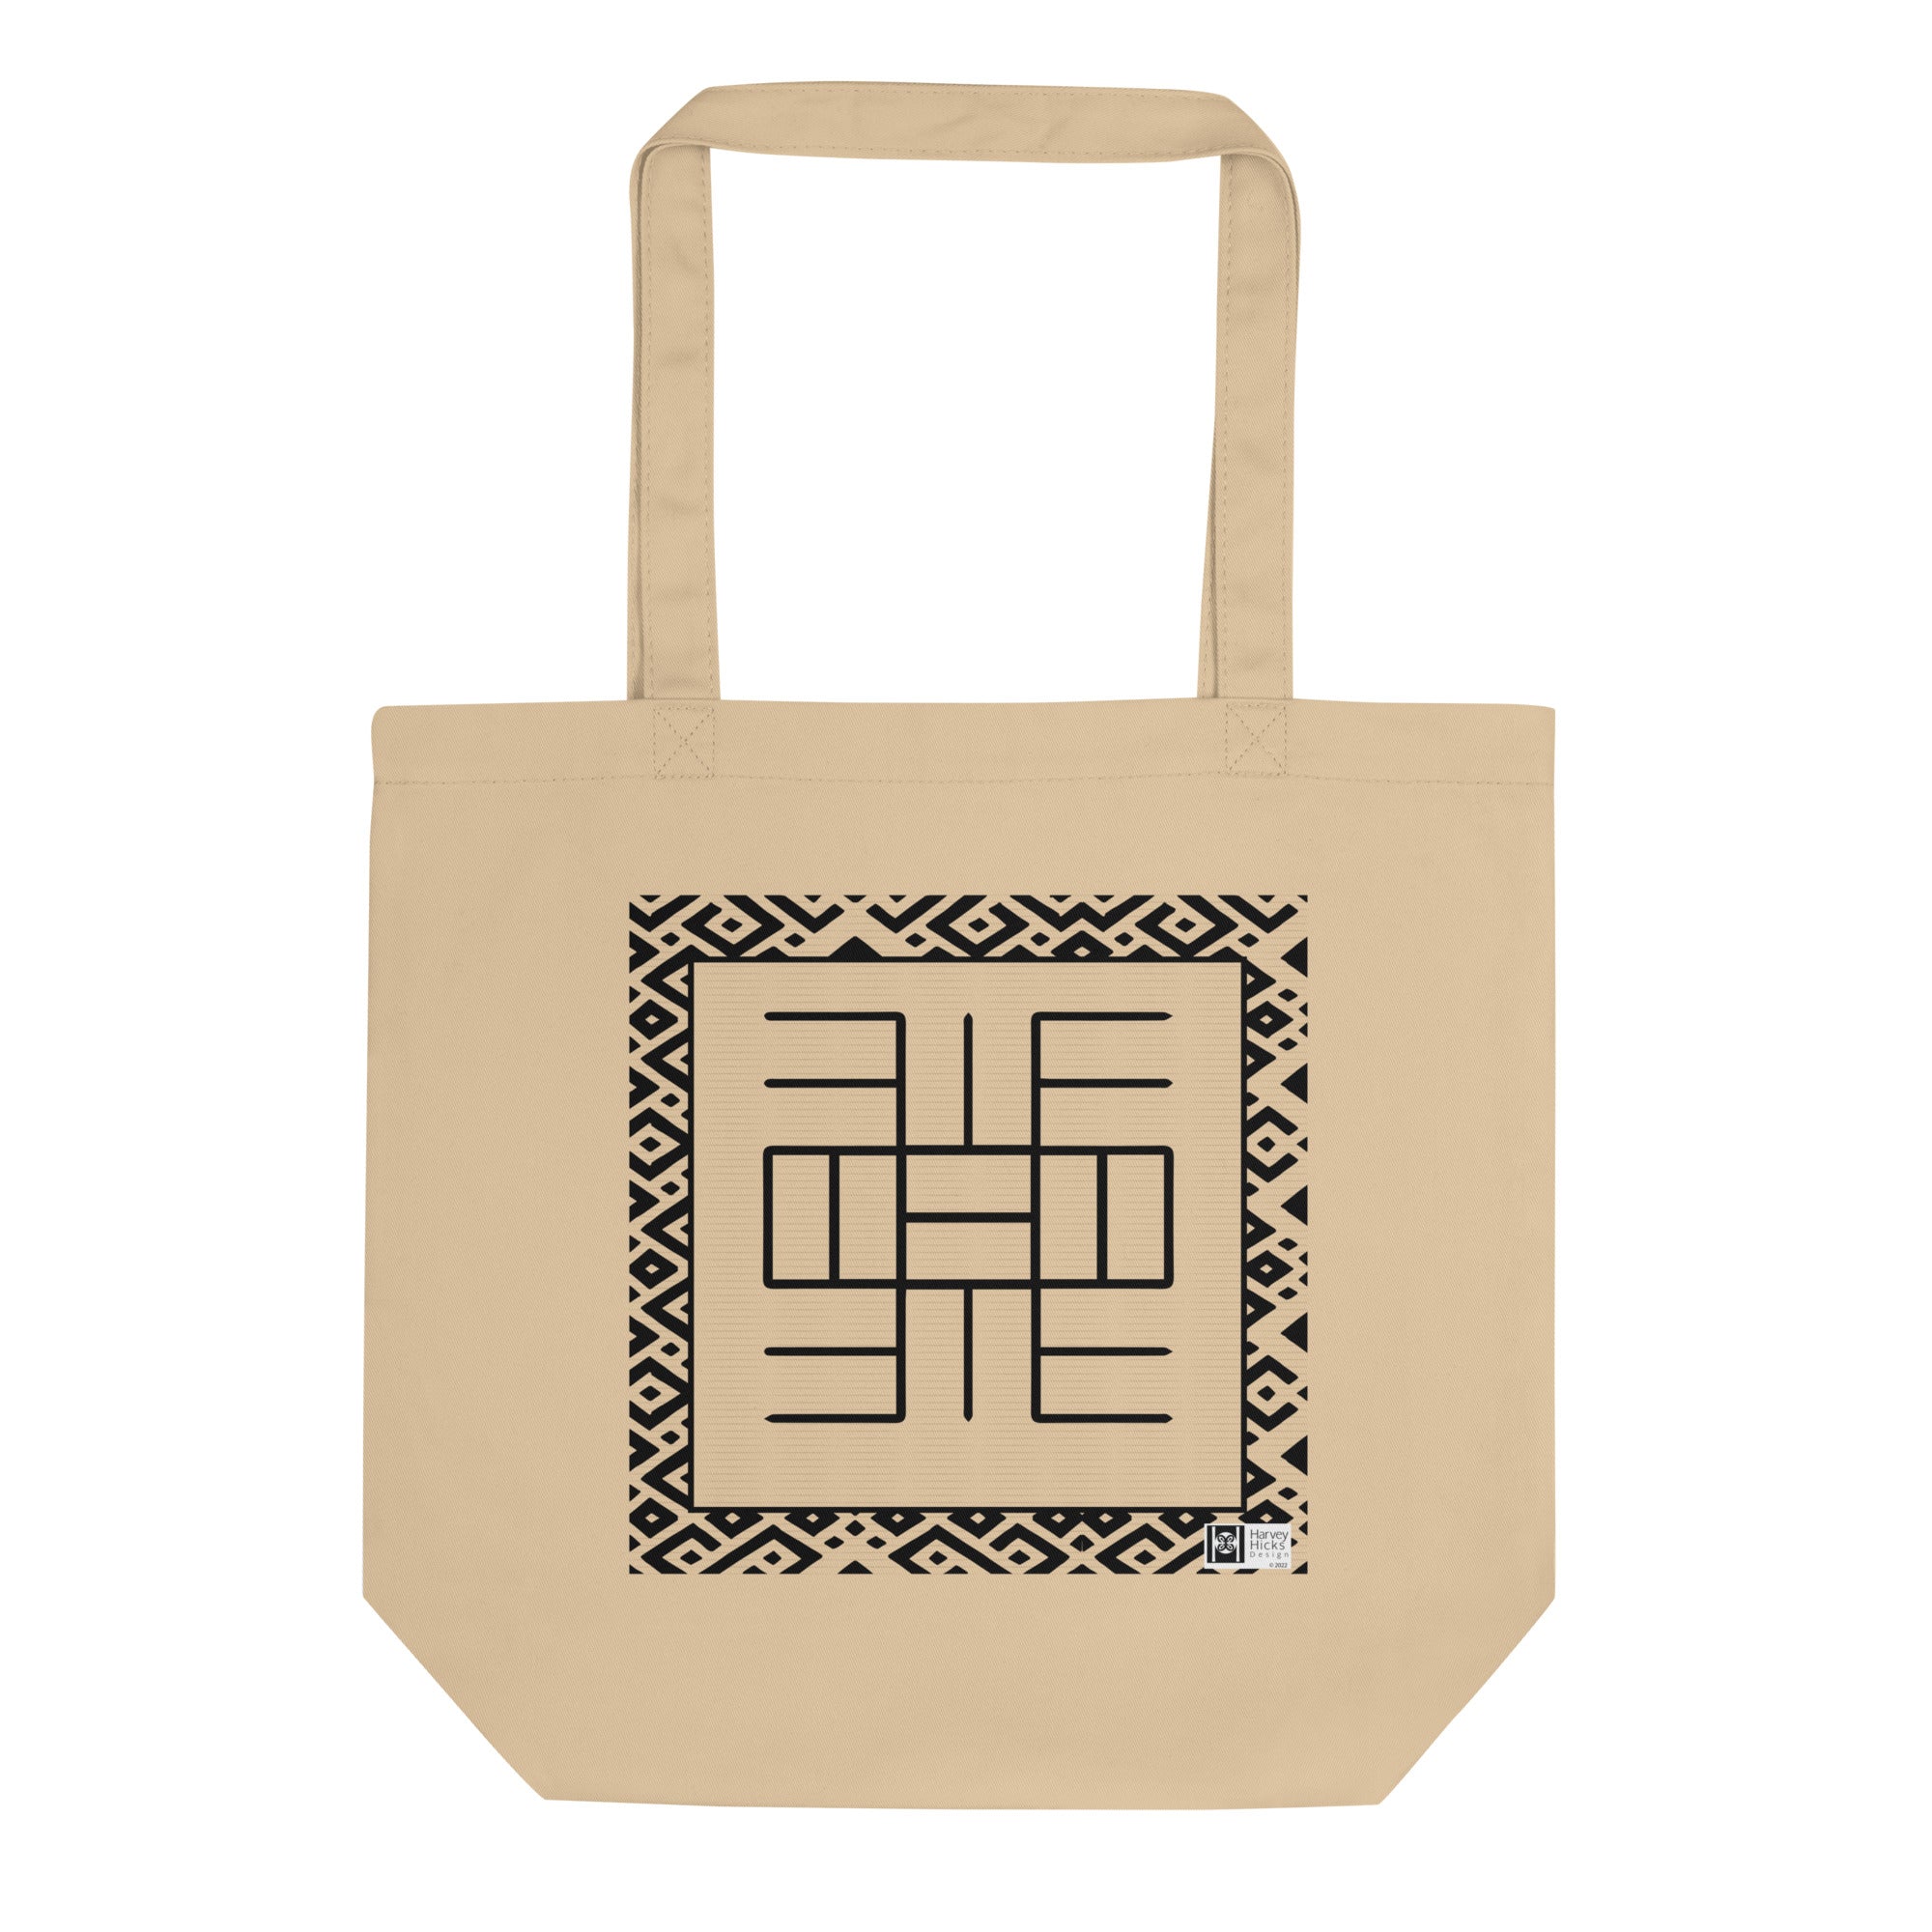 100% cotton Eco Tote Bag, featuring the Adinkra symbol for humility, NO TEXT